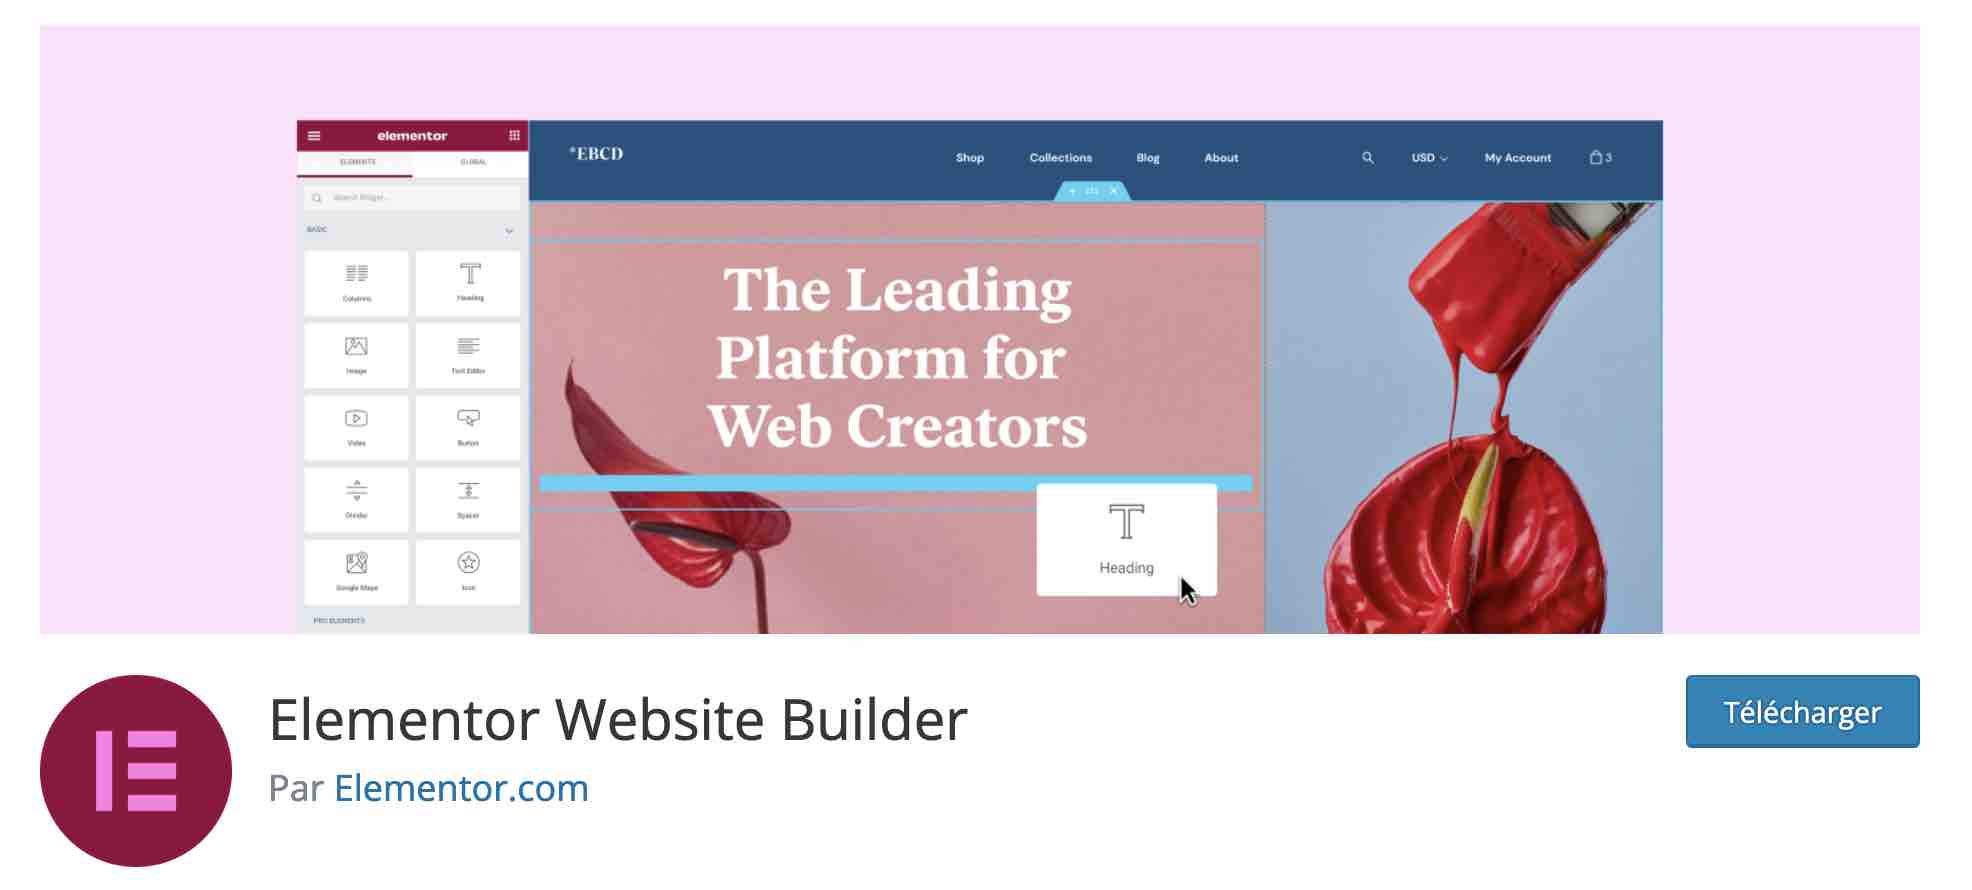 Elementor page builder allows to create WordPress anchors.